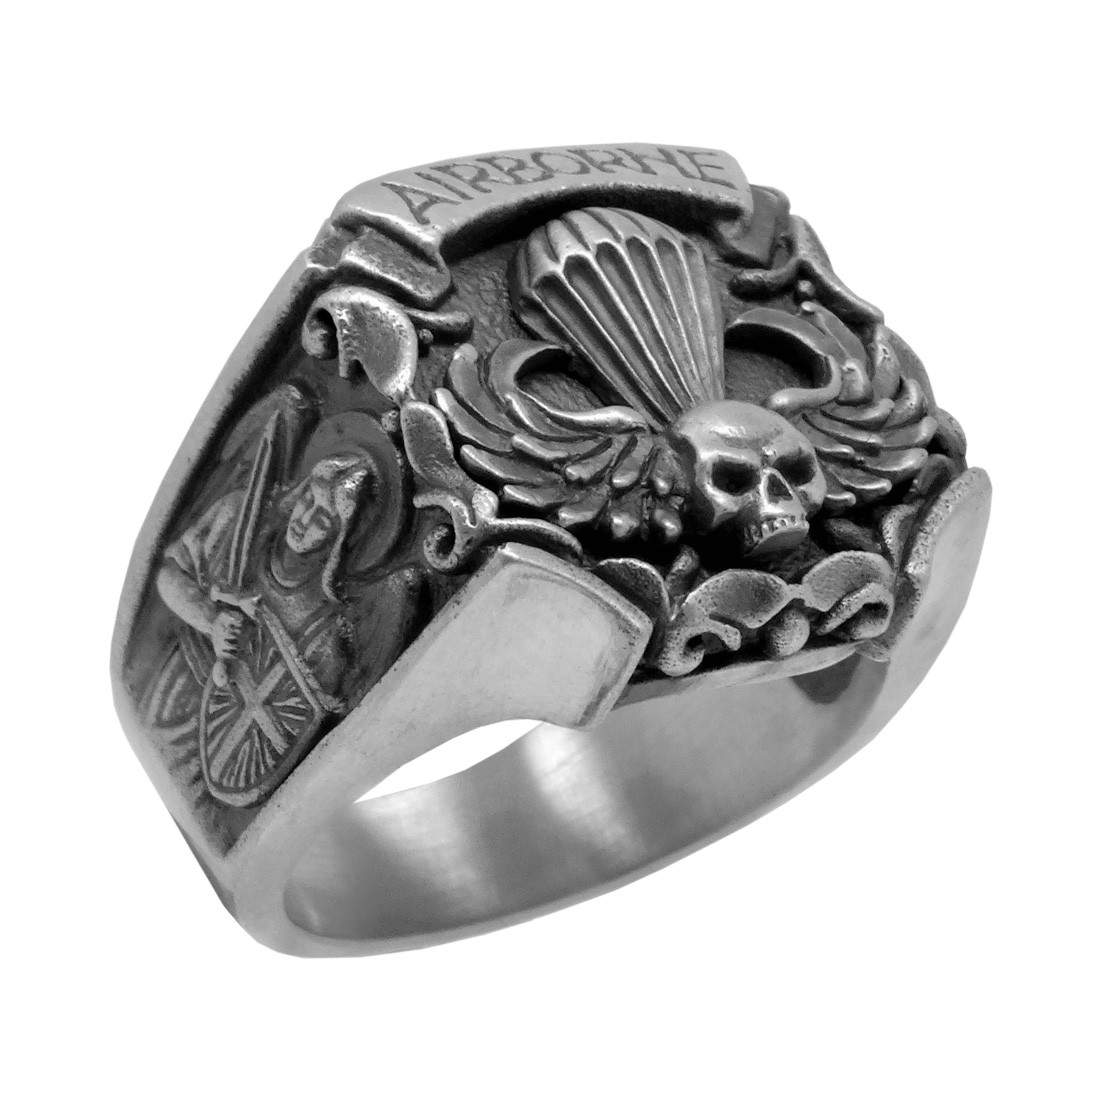 ARMY SOLDIER US MILITARY SKULL 925 STERLING SILVER MENS RING NEW JEWELLERY 